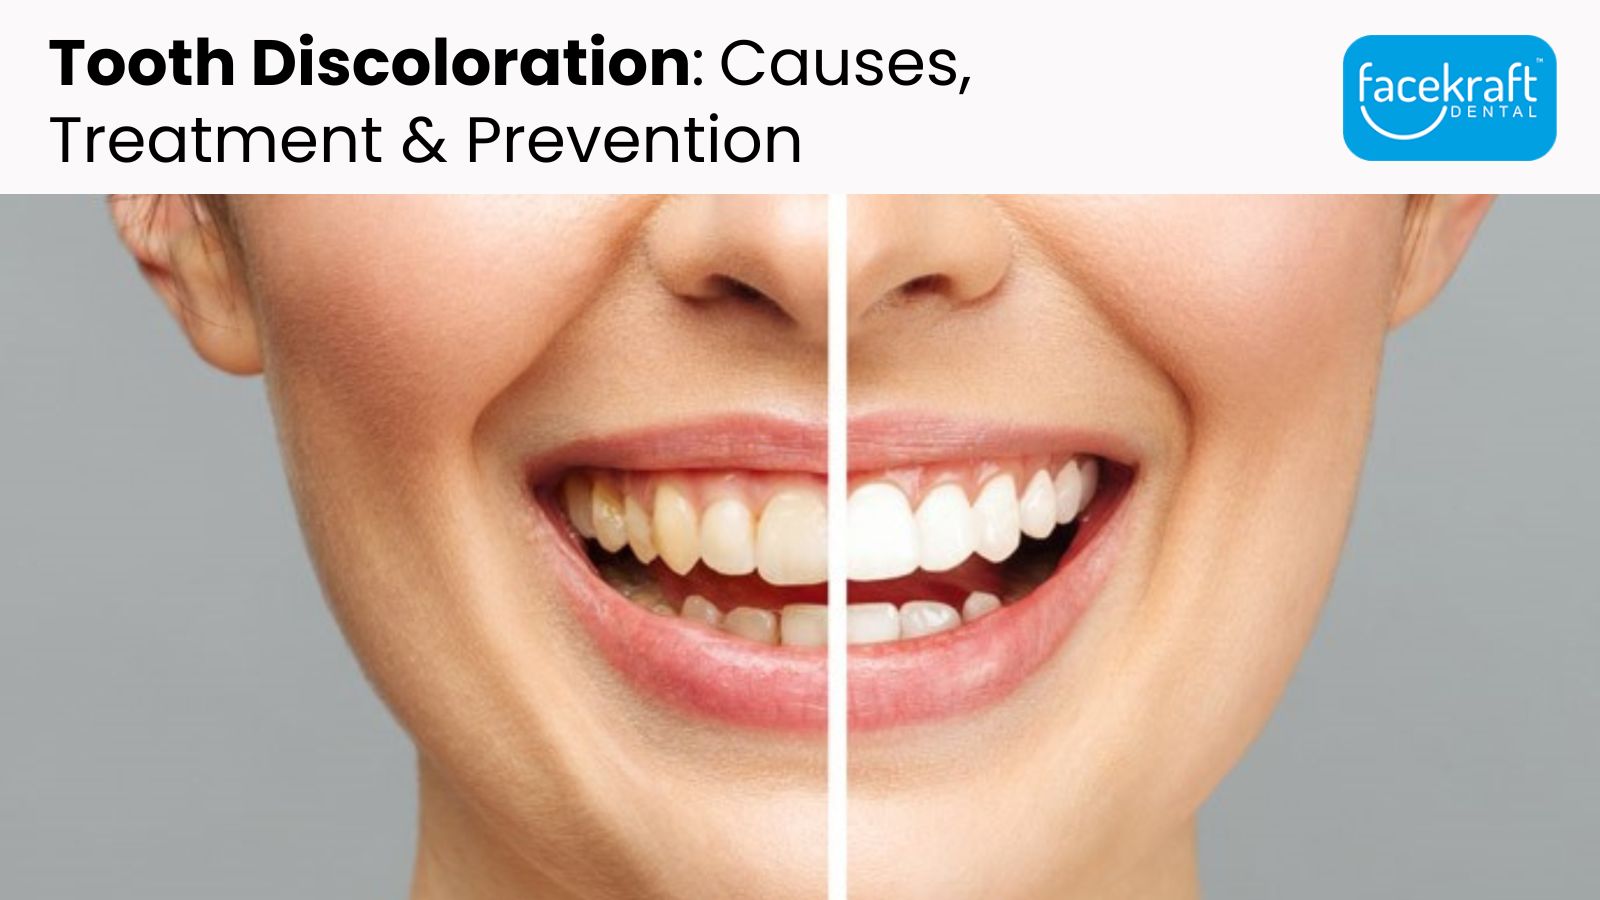 Tooth Discoloration: Causes, Treatment & Prevention